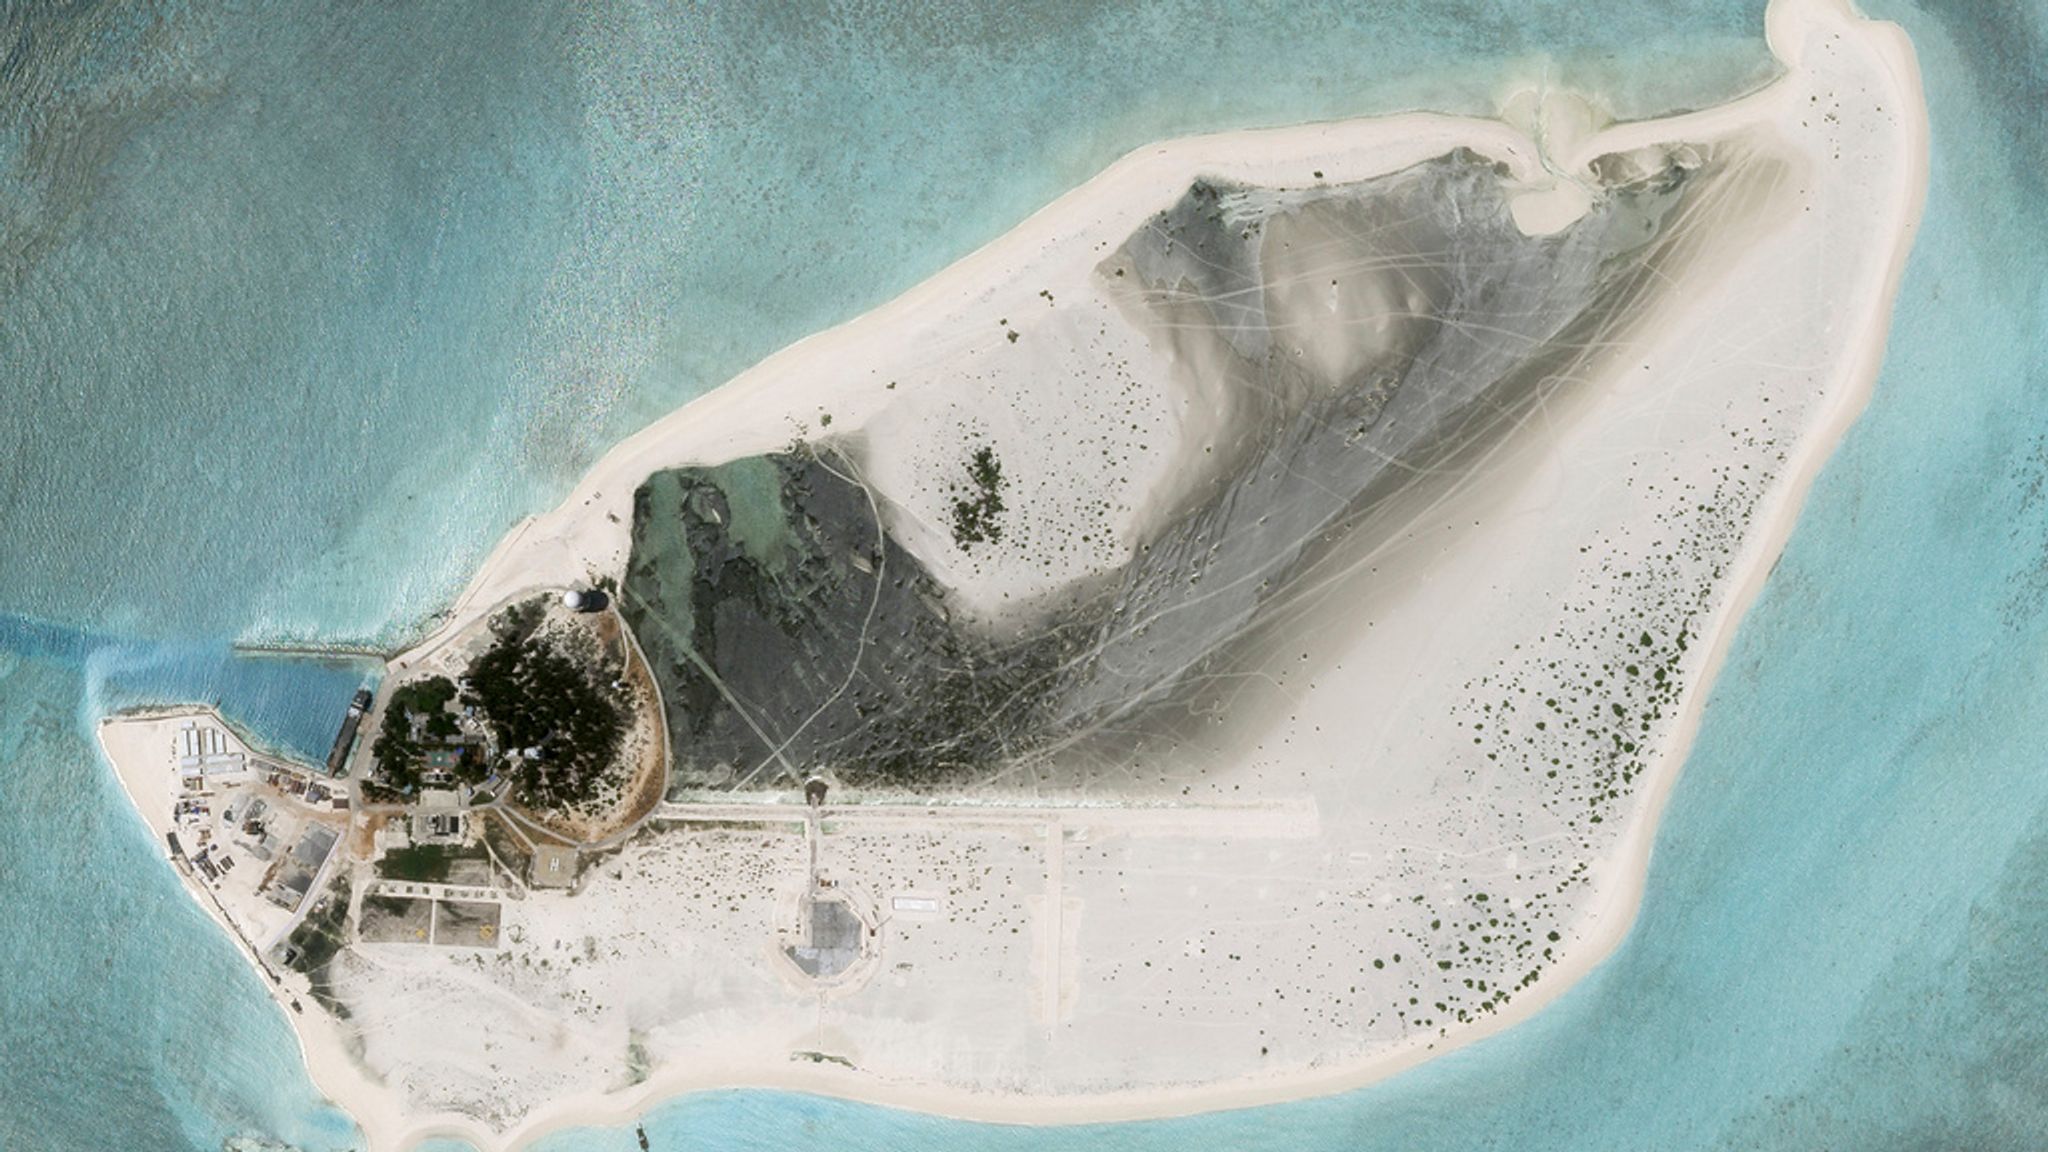 China building airstrip on disputed island in South China Sea